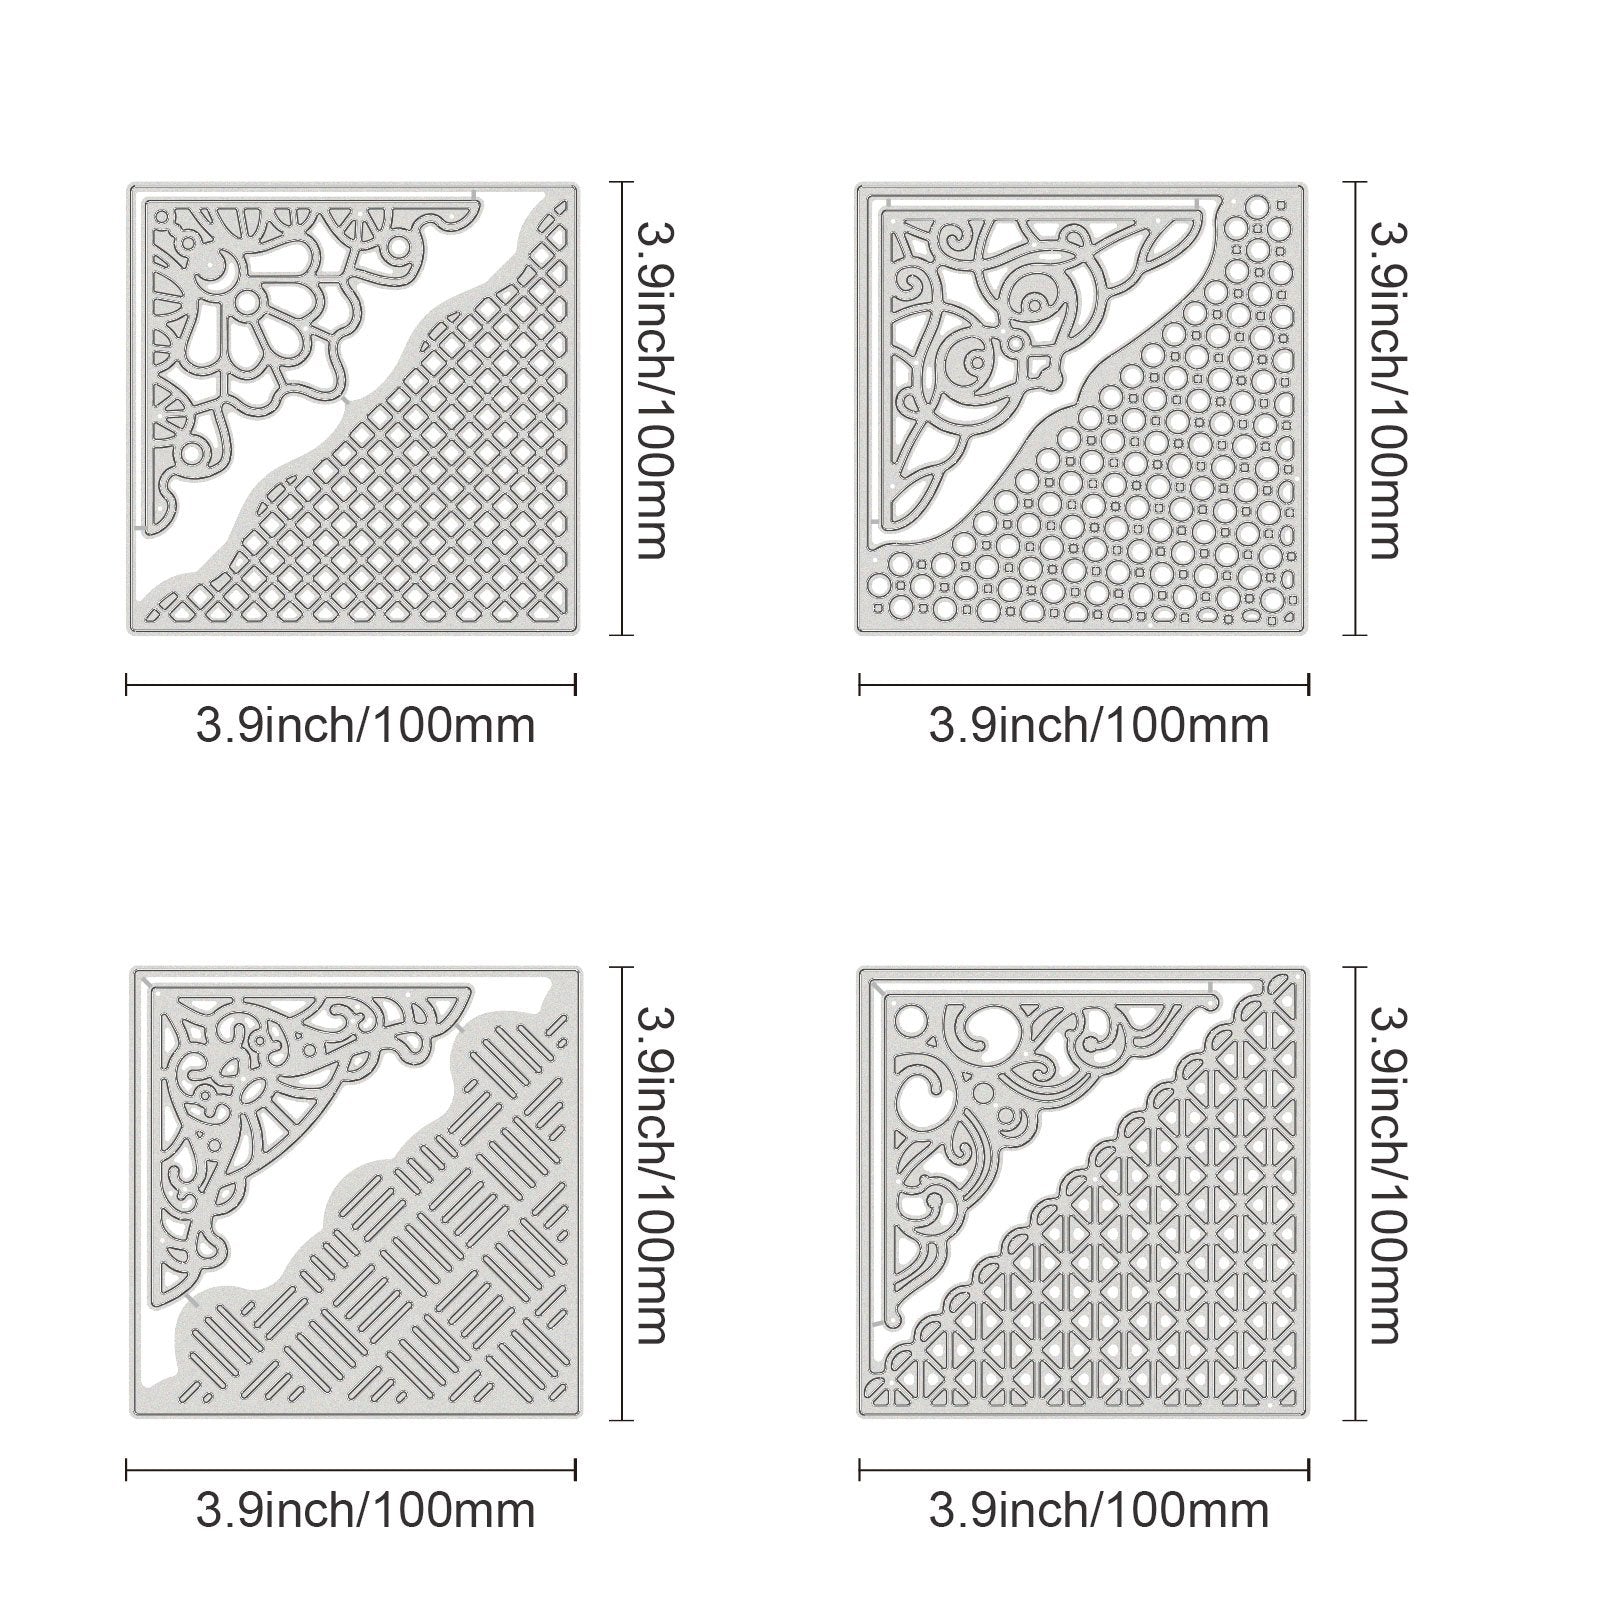 CRASPIRE 4 Pieces Square Hollow Out Background Frame Cutting Dies Metal Corner Lace Die Embossing Stencils for DIY Card Scrapbooking Craft Album Paper Decor